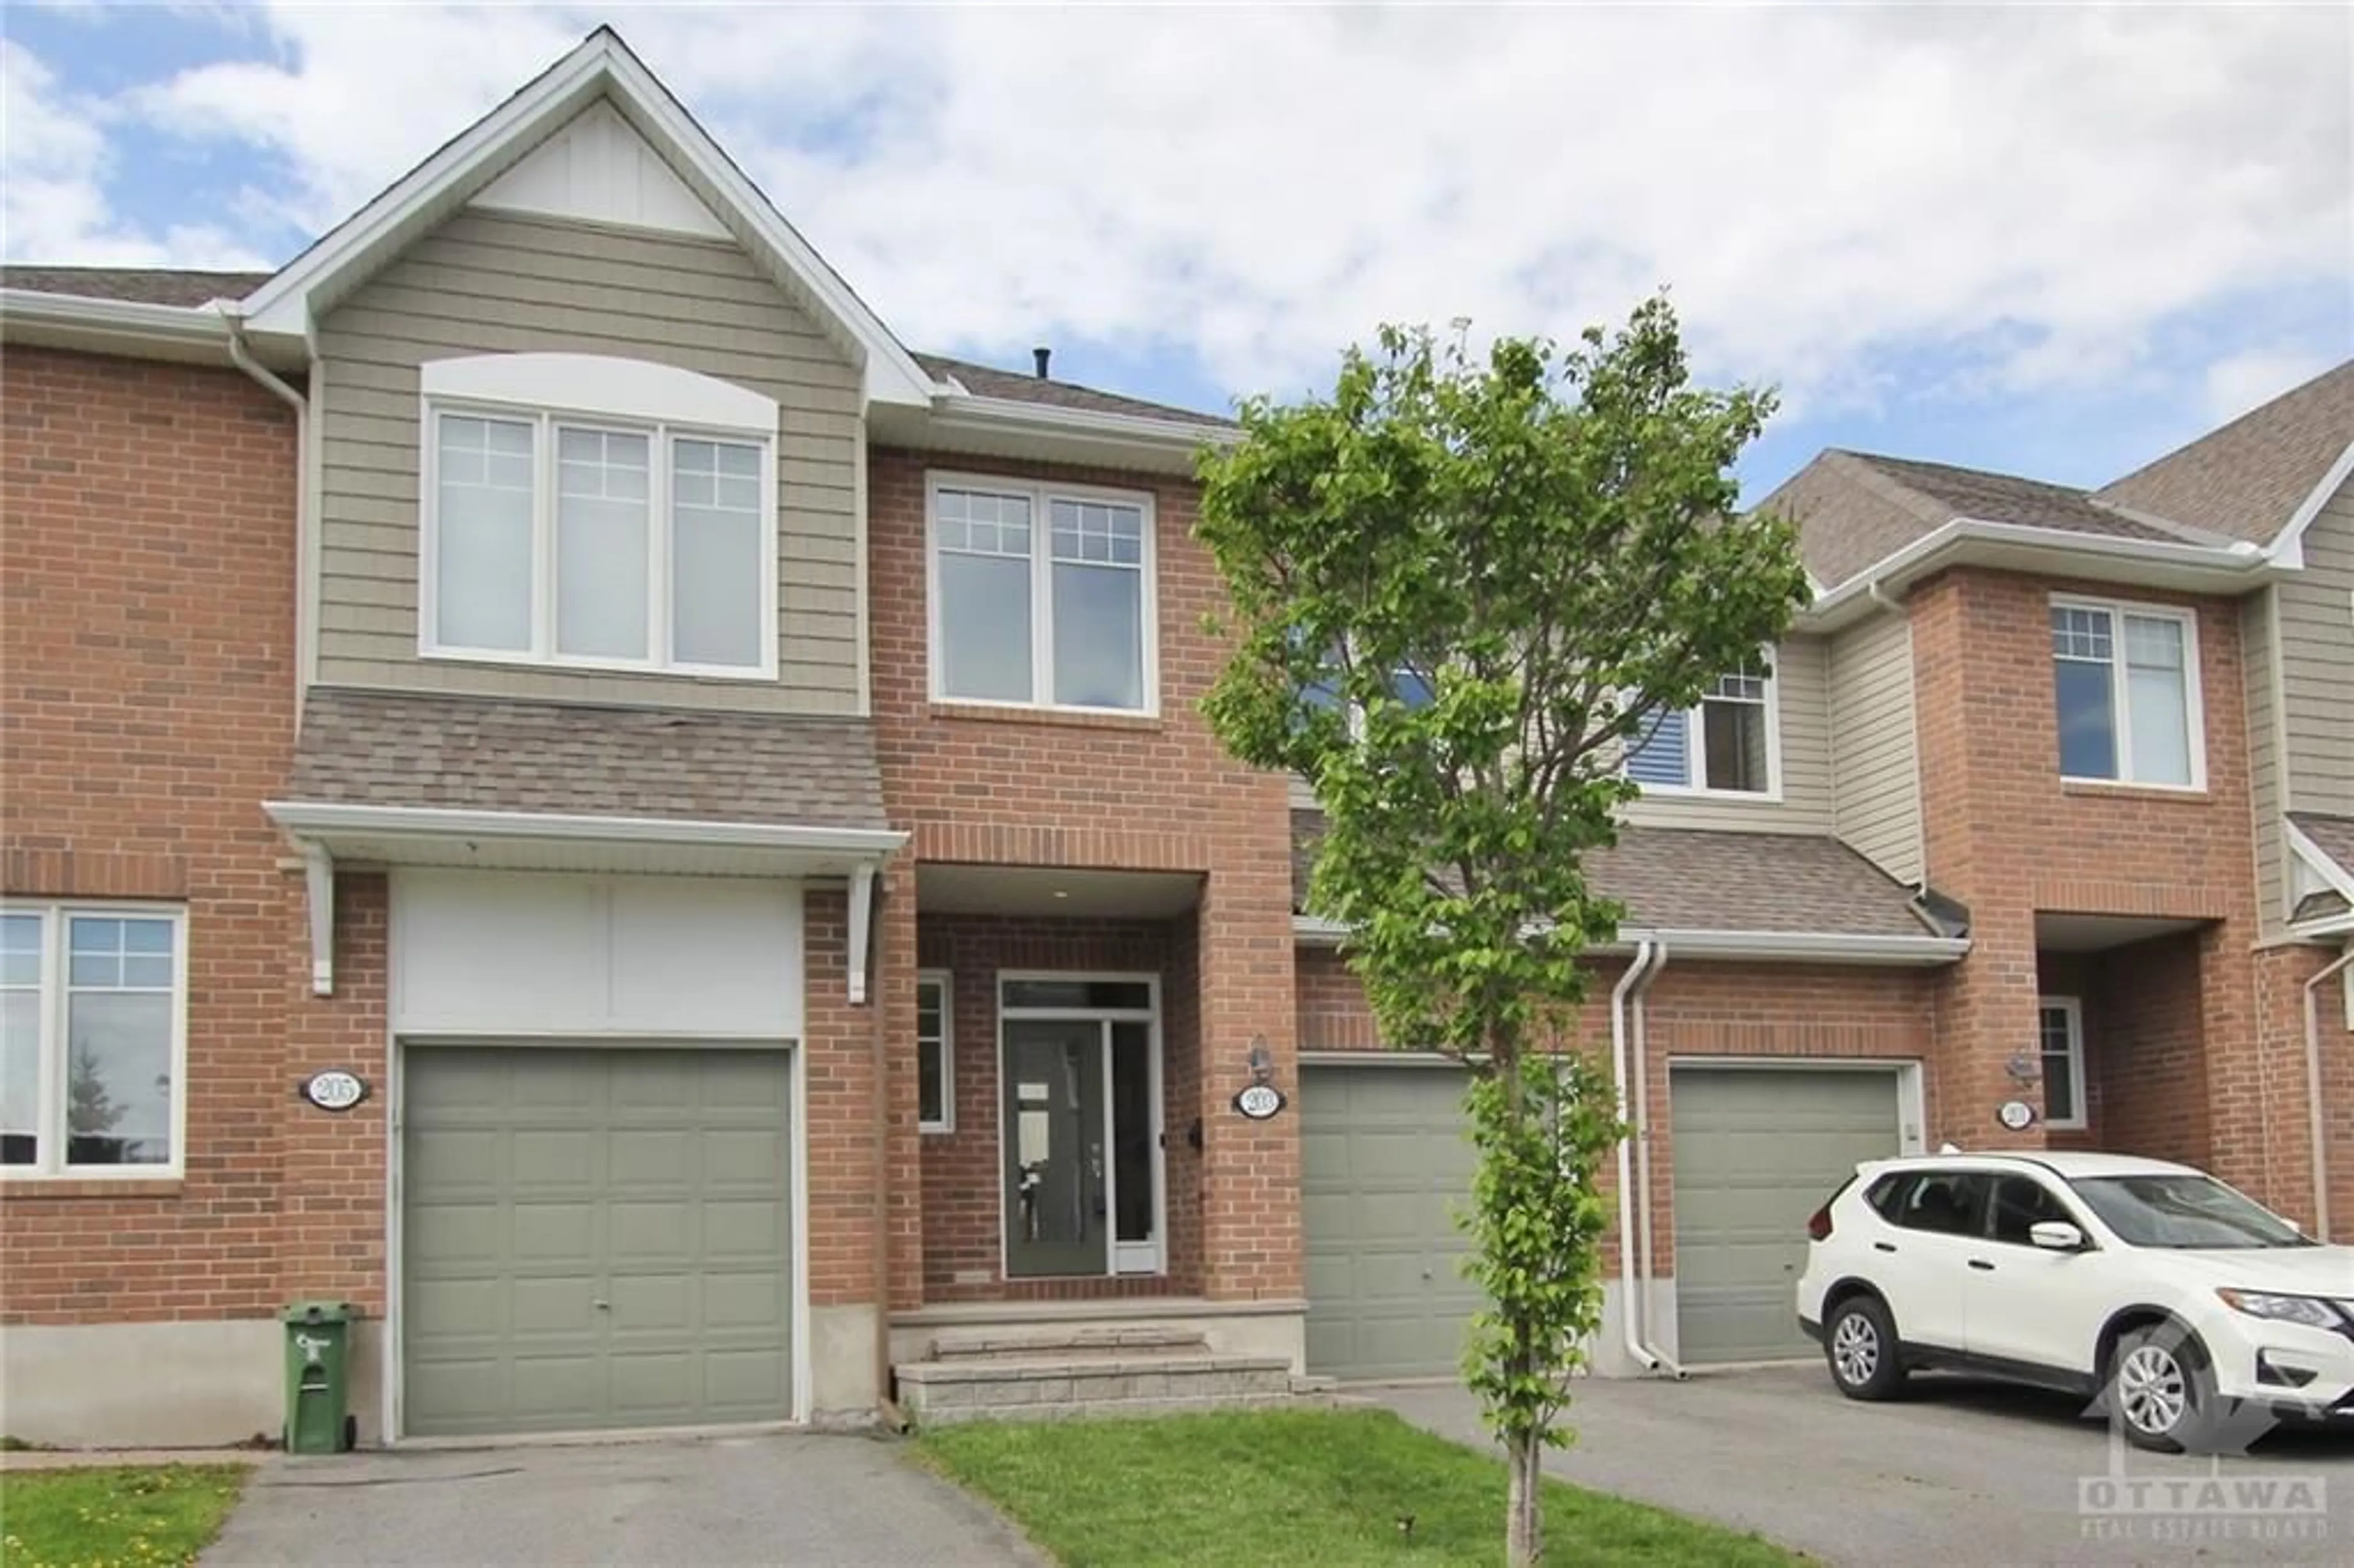 A pic from exterior of the house or condo for 203 BRAMBLING Way, Ottawa Ontario K2J 5V5